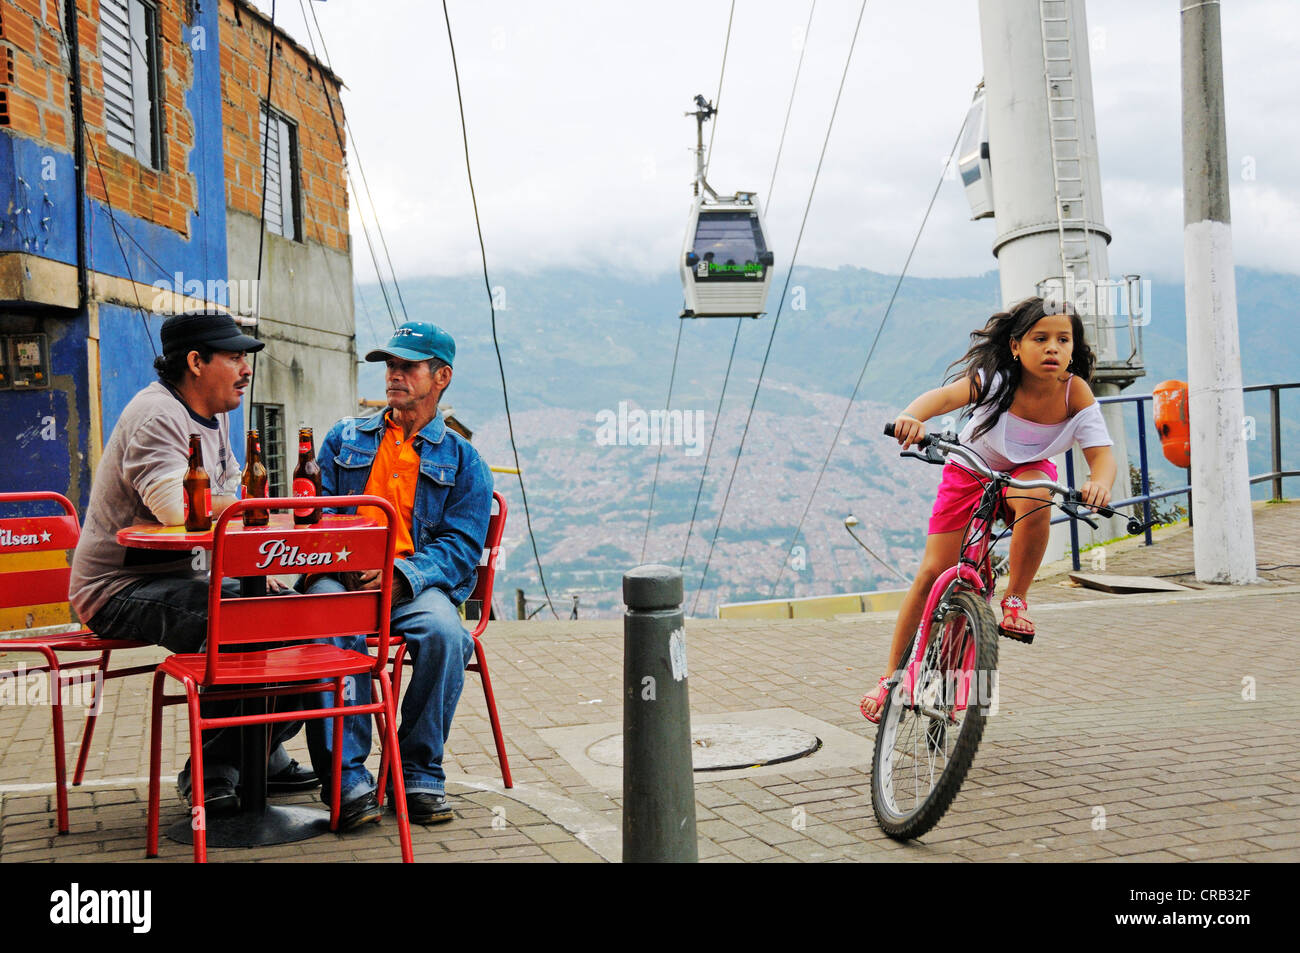 Men sitting in a street café, girl riding a bicycle, Metrocable cable car at back, slums, Comuna 13, Medellin, Colombia Stock Photo